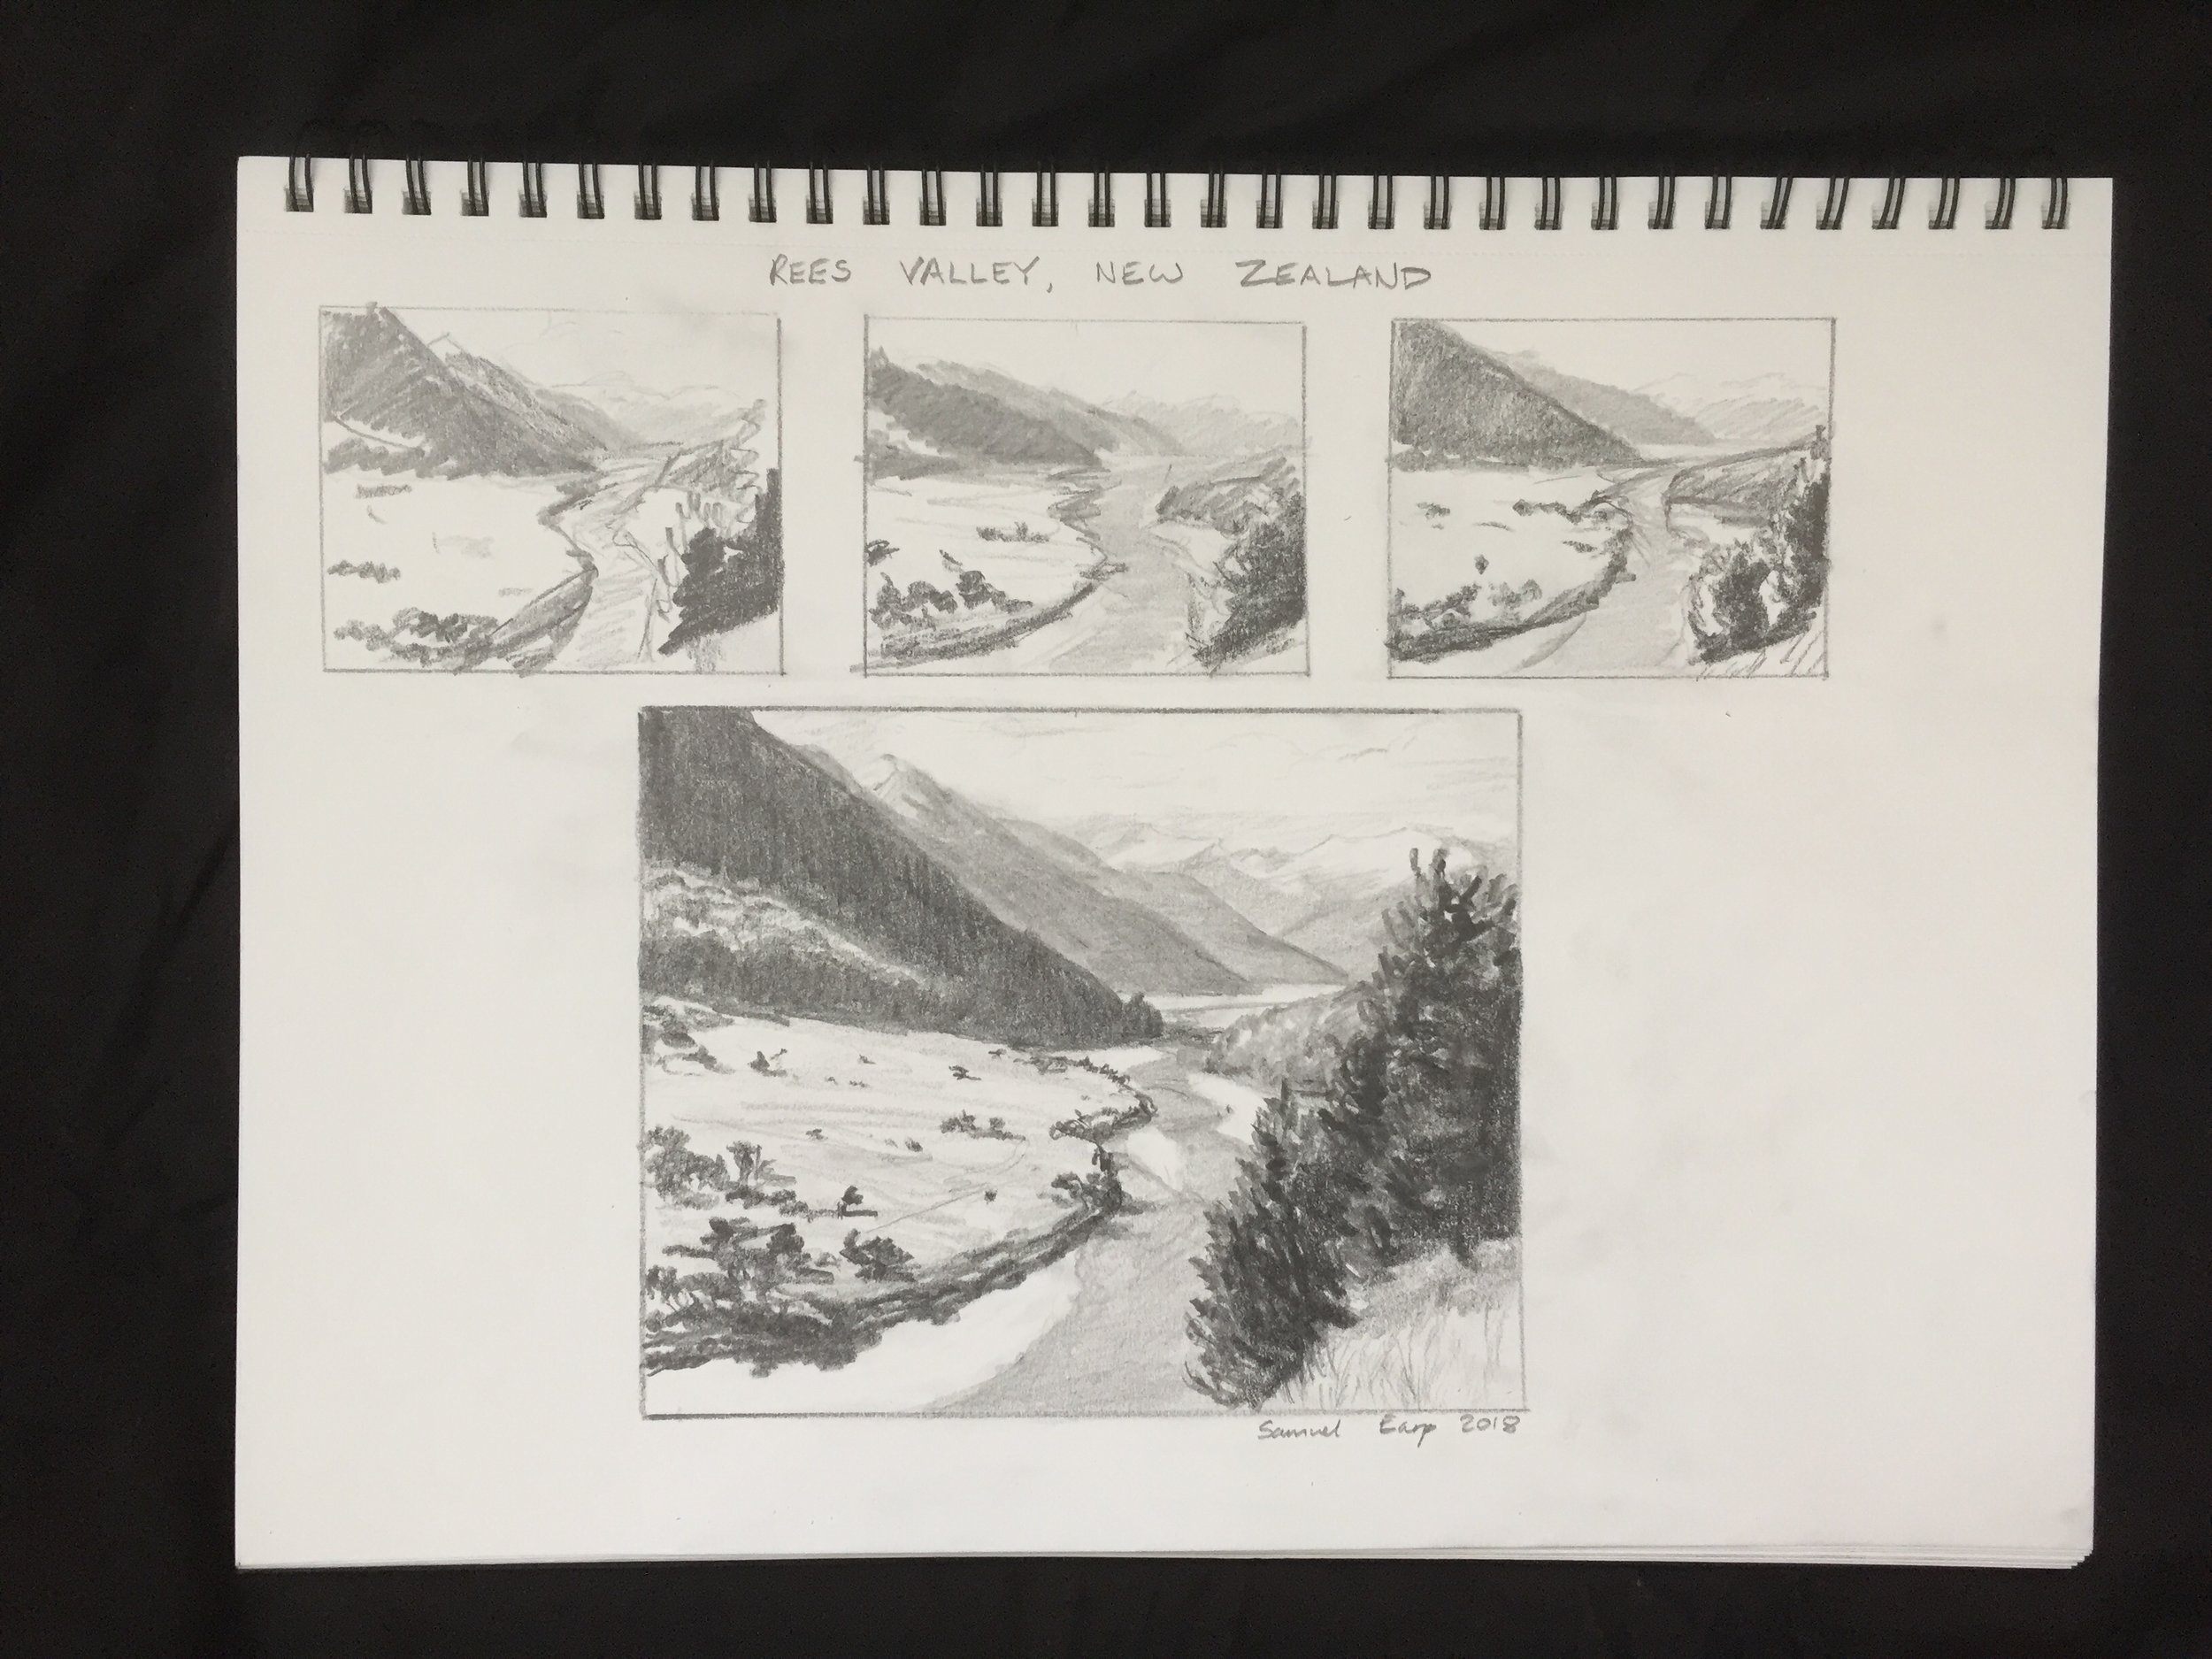 How To Draw Landscapes Samuel Earp, How To Draw Landscapes With Pencil Step By